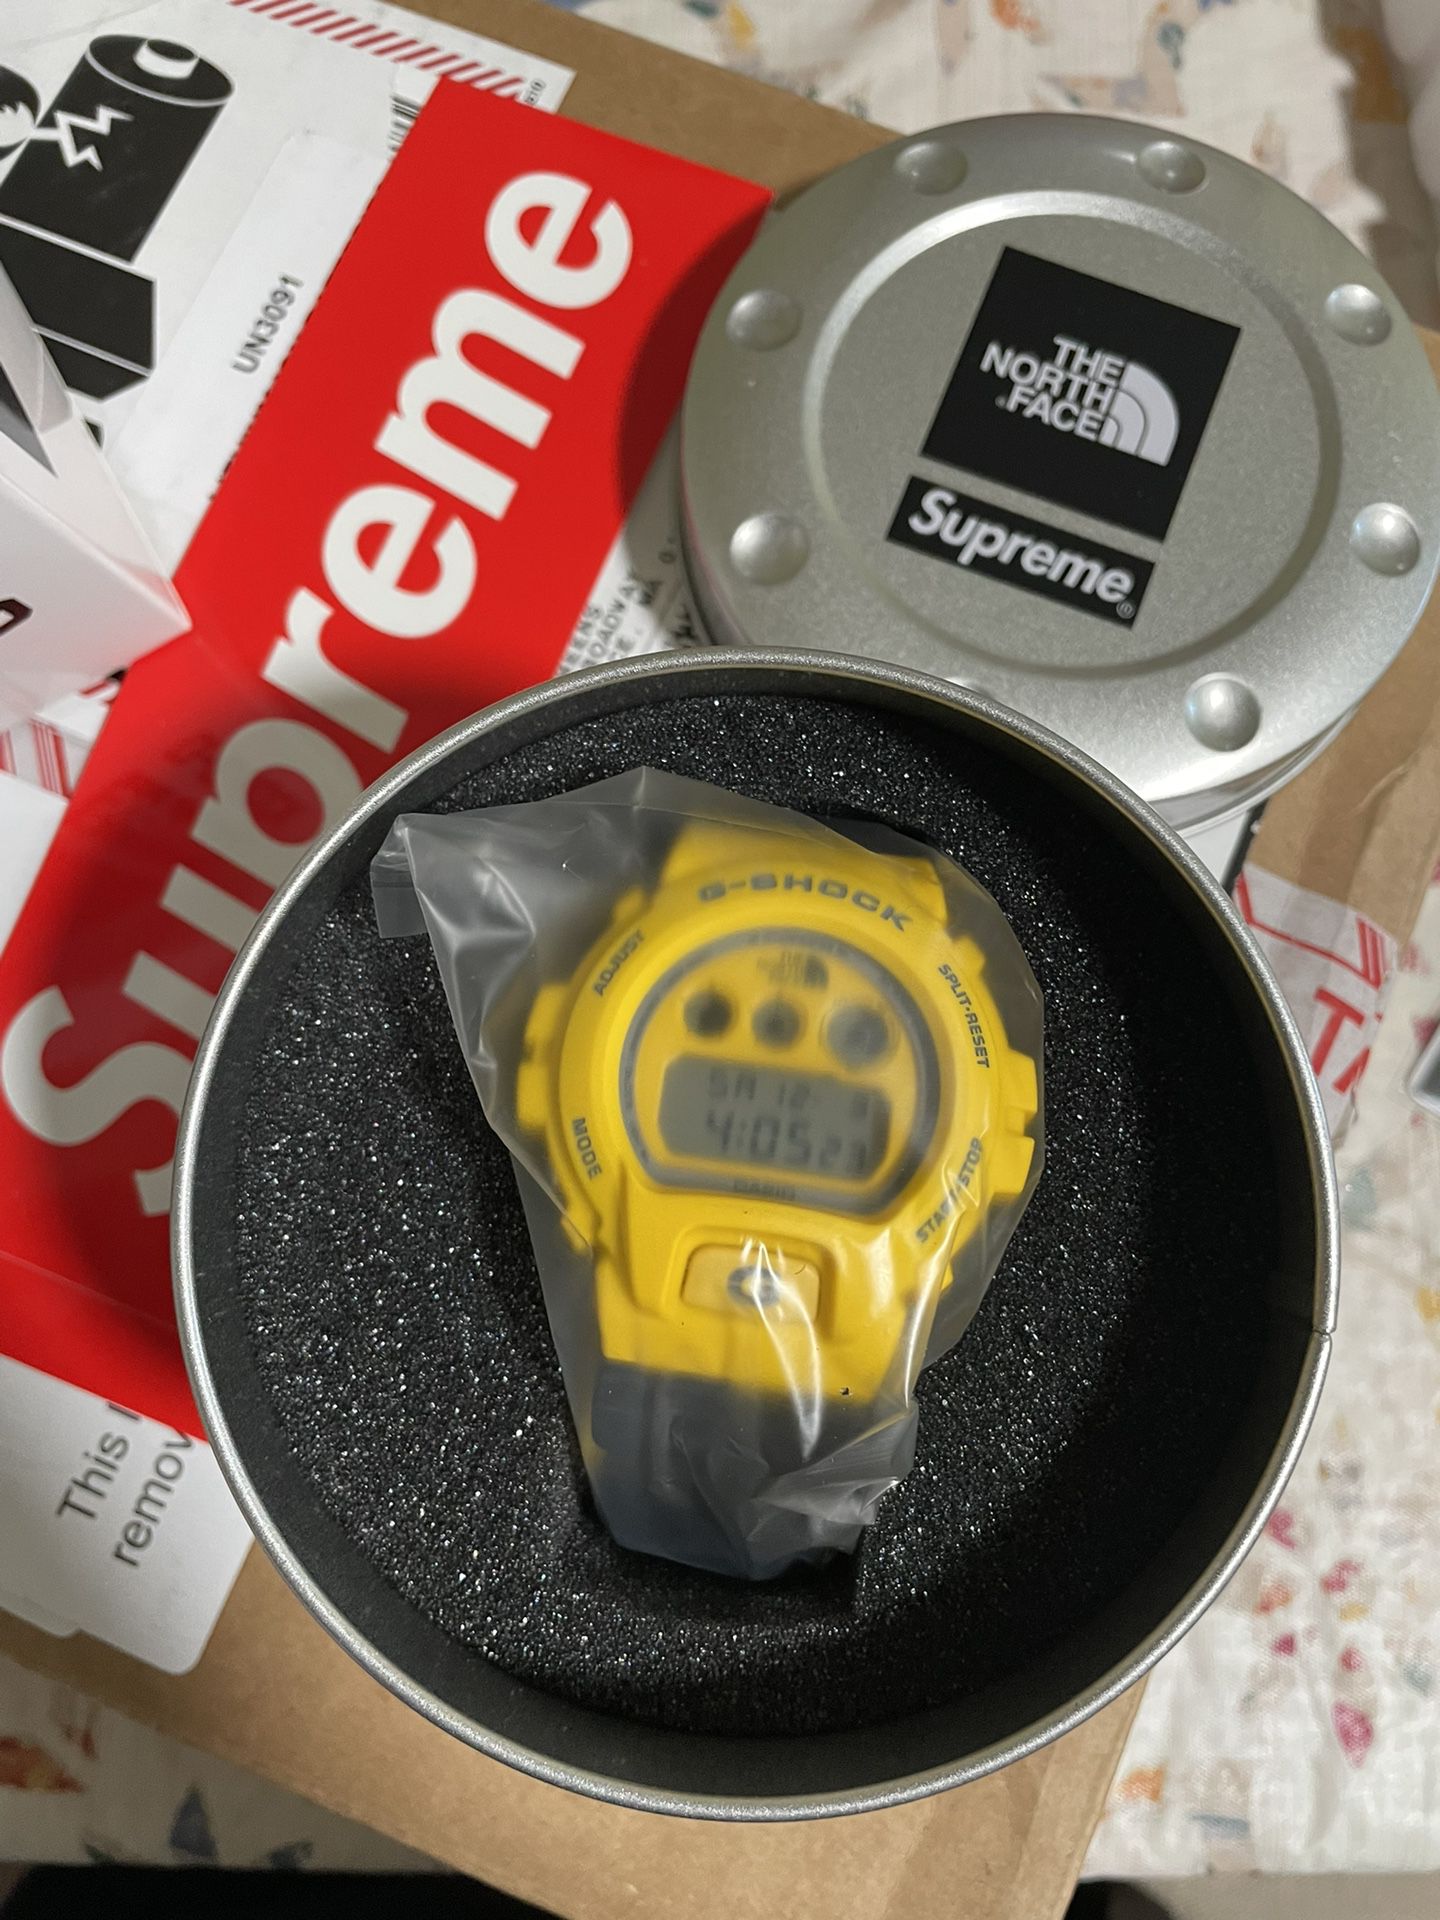 Supreme X The North Face G-Shock Watch